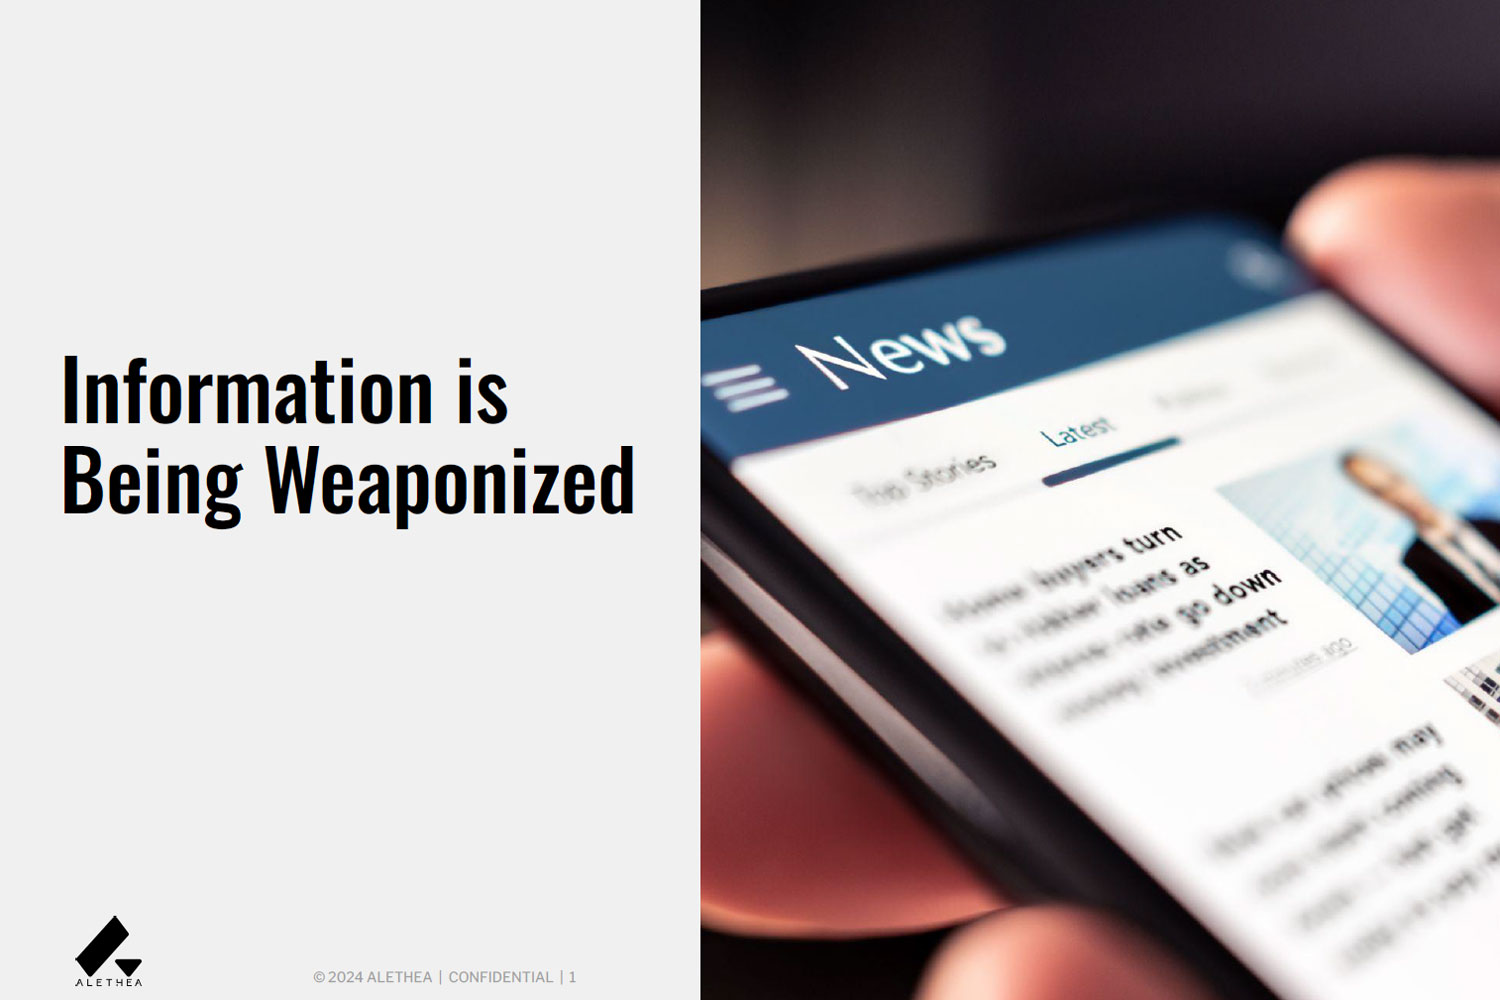 Information is Being Weaponized